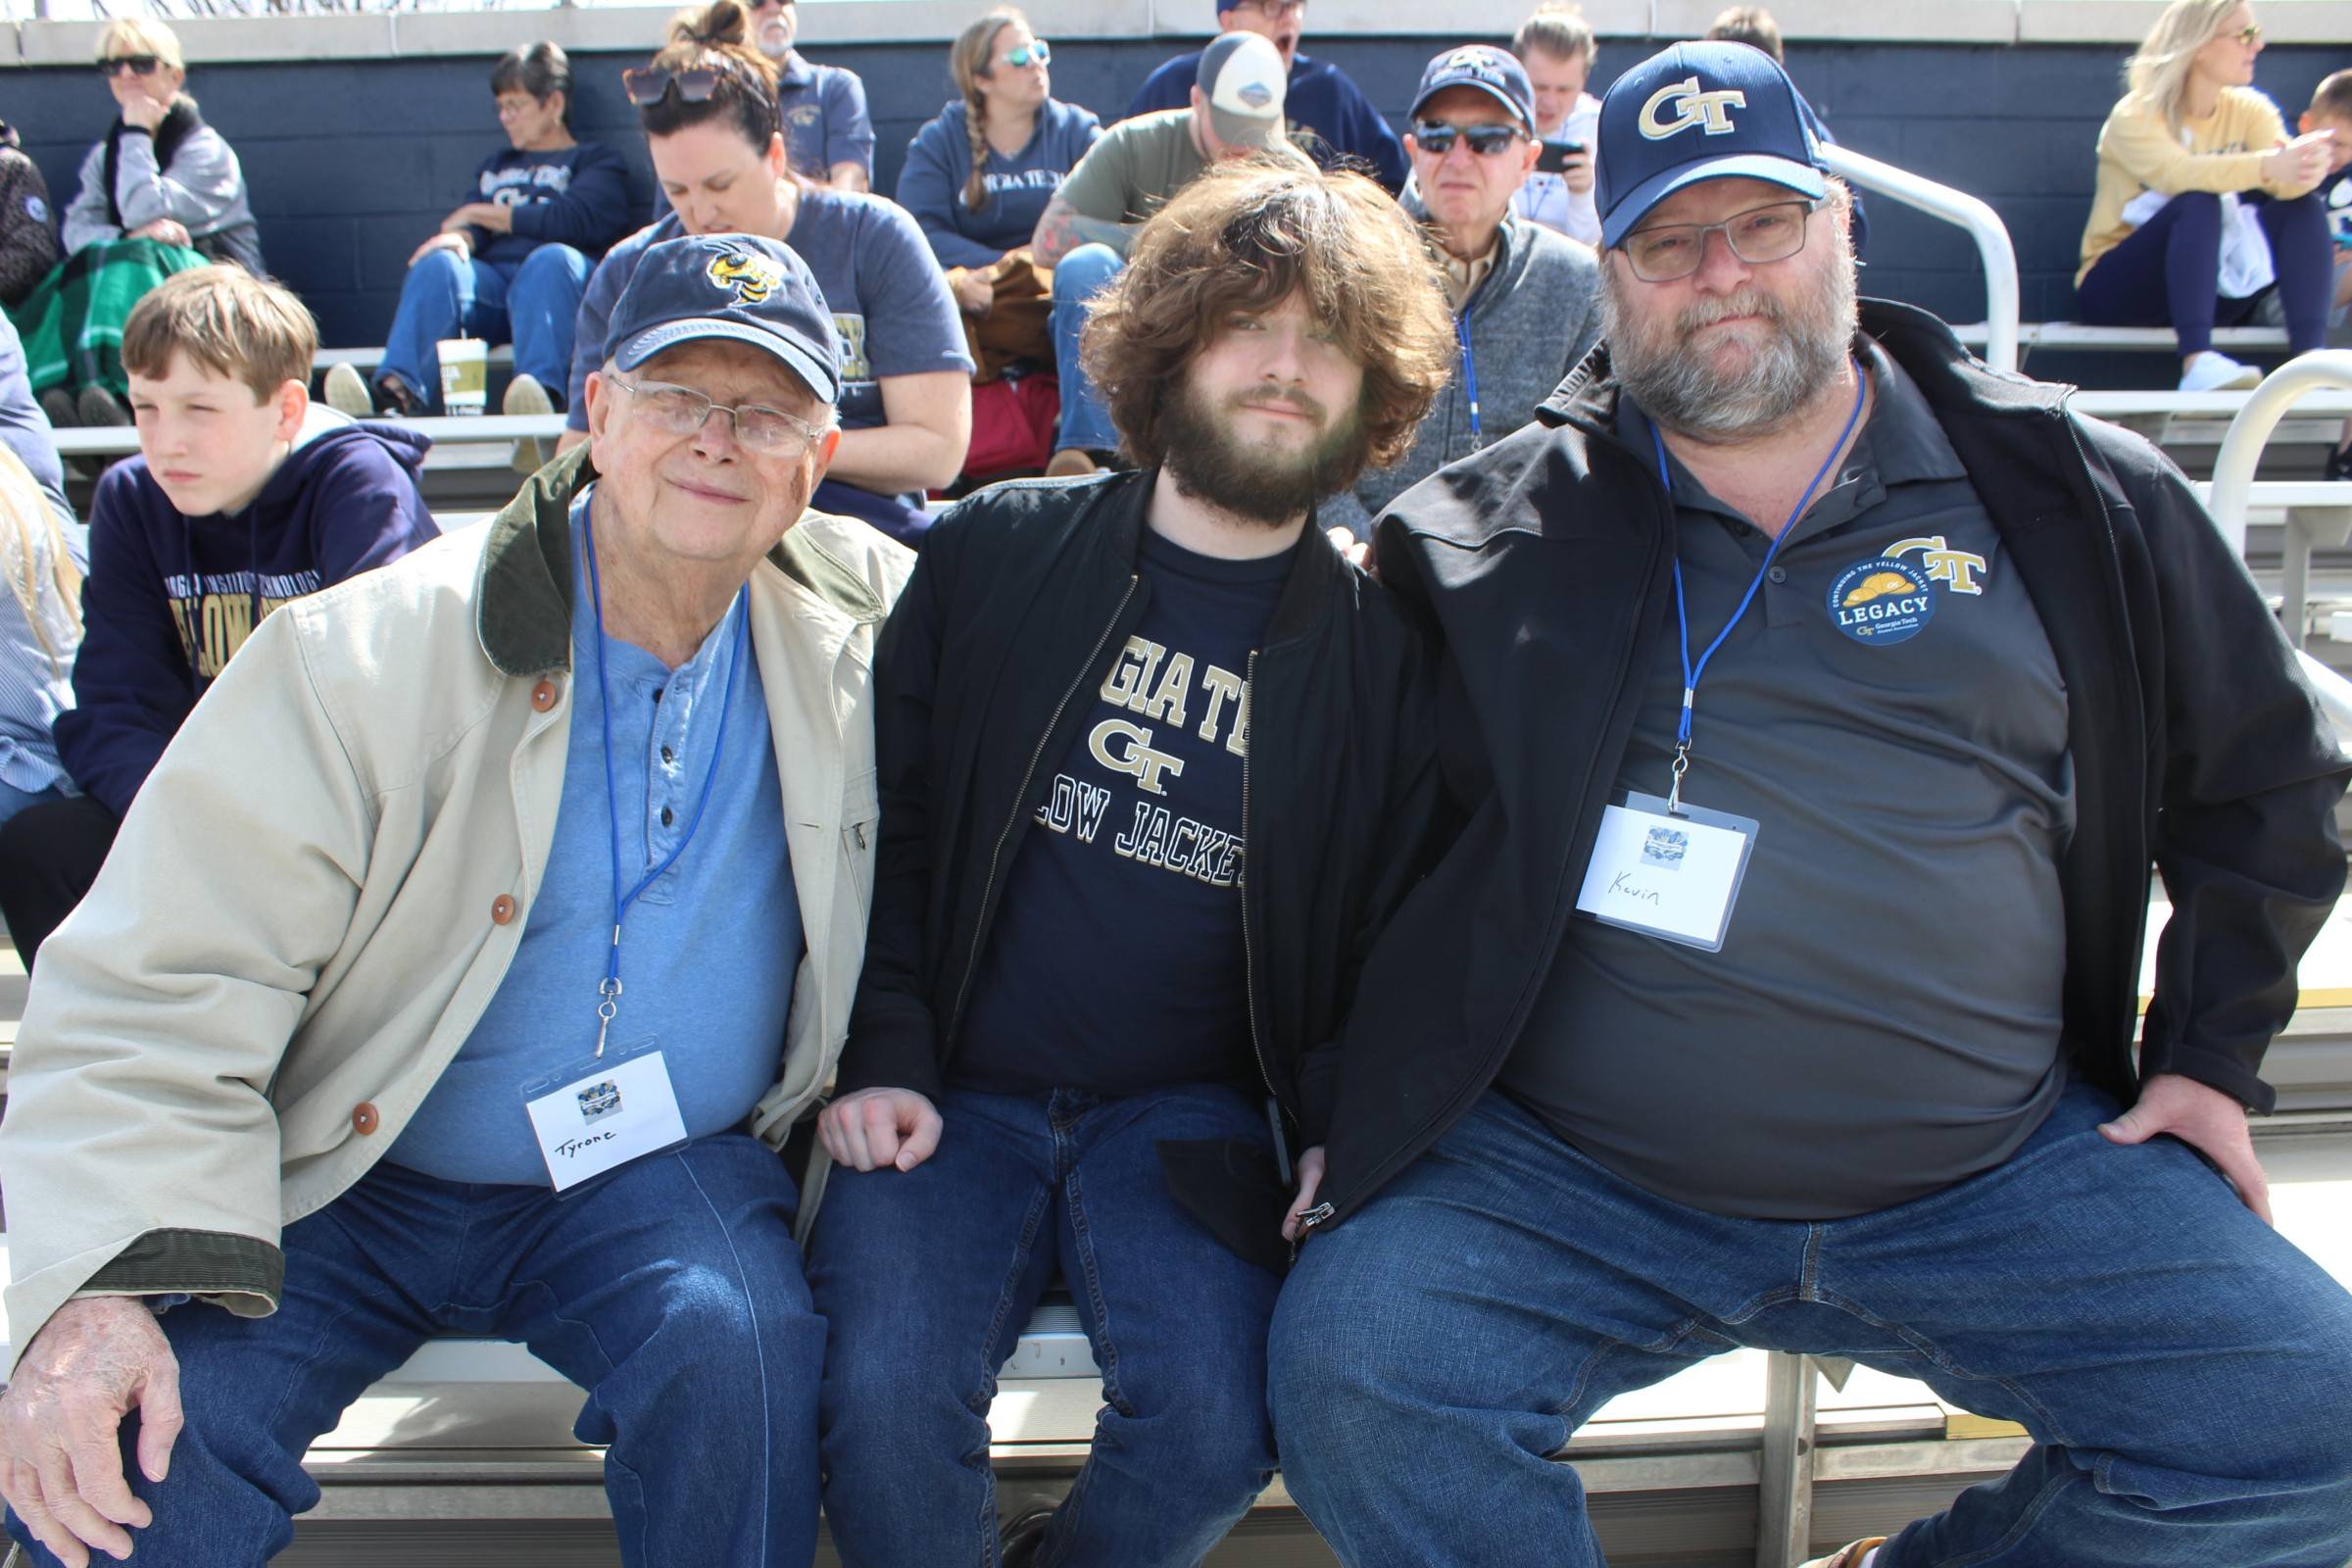 three generations of men sit in seats at a baseball stadium, all wearing Georgia Tech hats or shirts